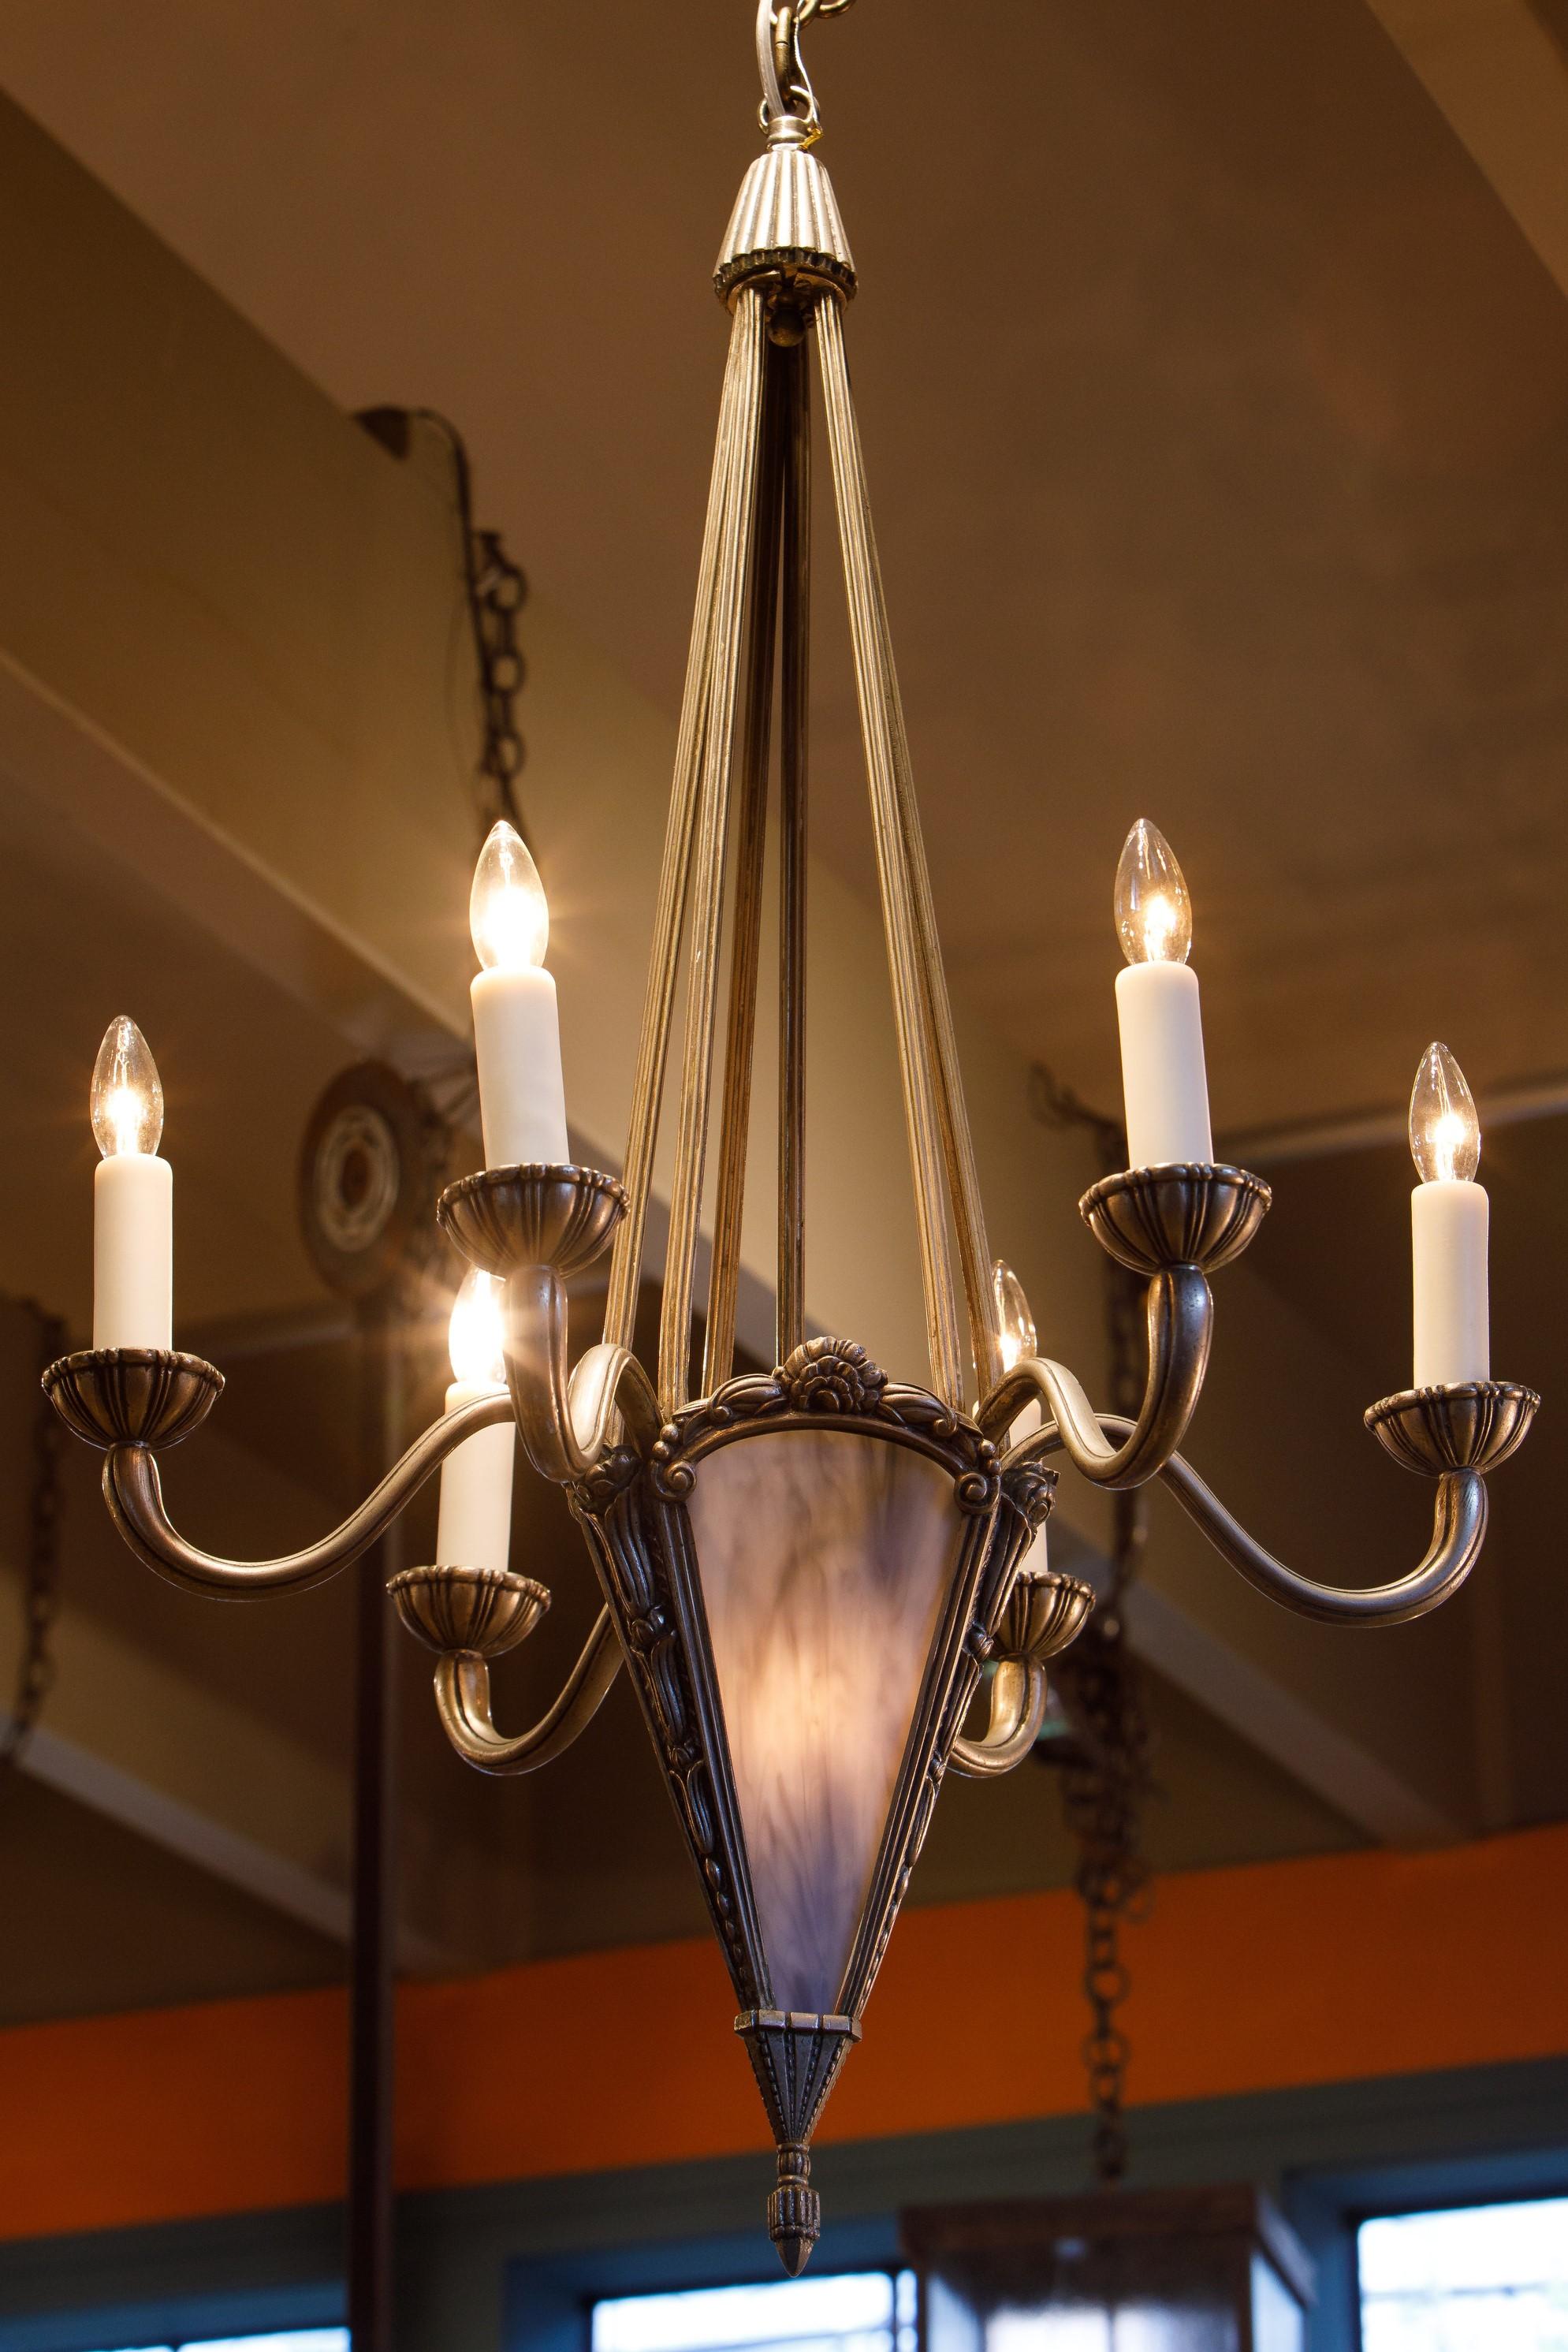 This is an impressive well preserved example of Art Deco lighting. Nickle on bronze chandelier circa 1940s with newly cut art glass panels. The light is re-wired for the USA with candelabra/ E12 sockets and one candelabra socket in the interior of